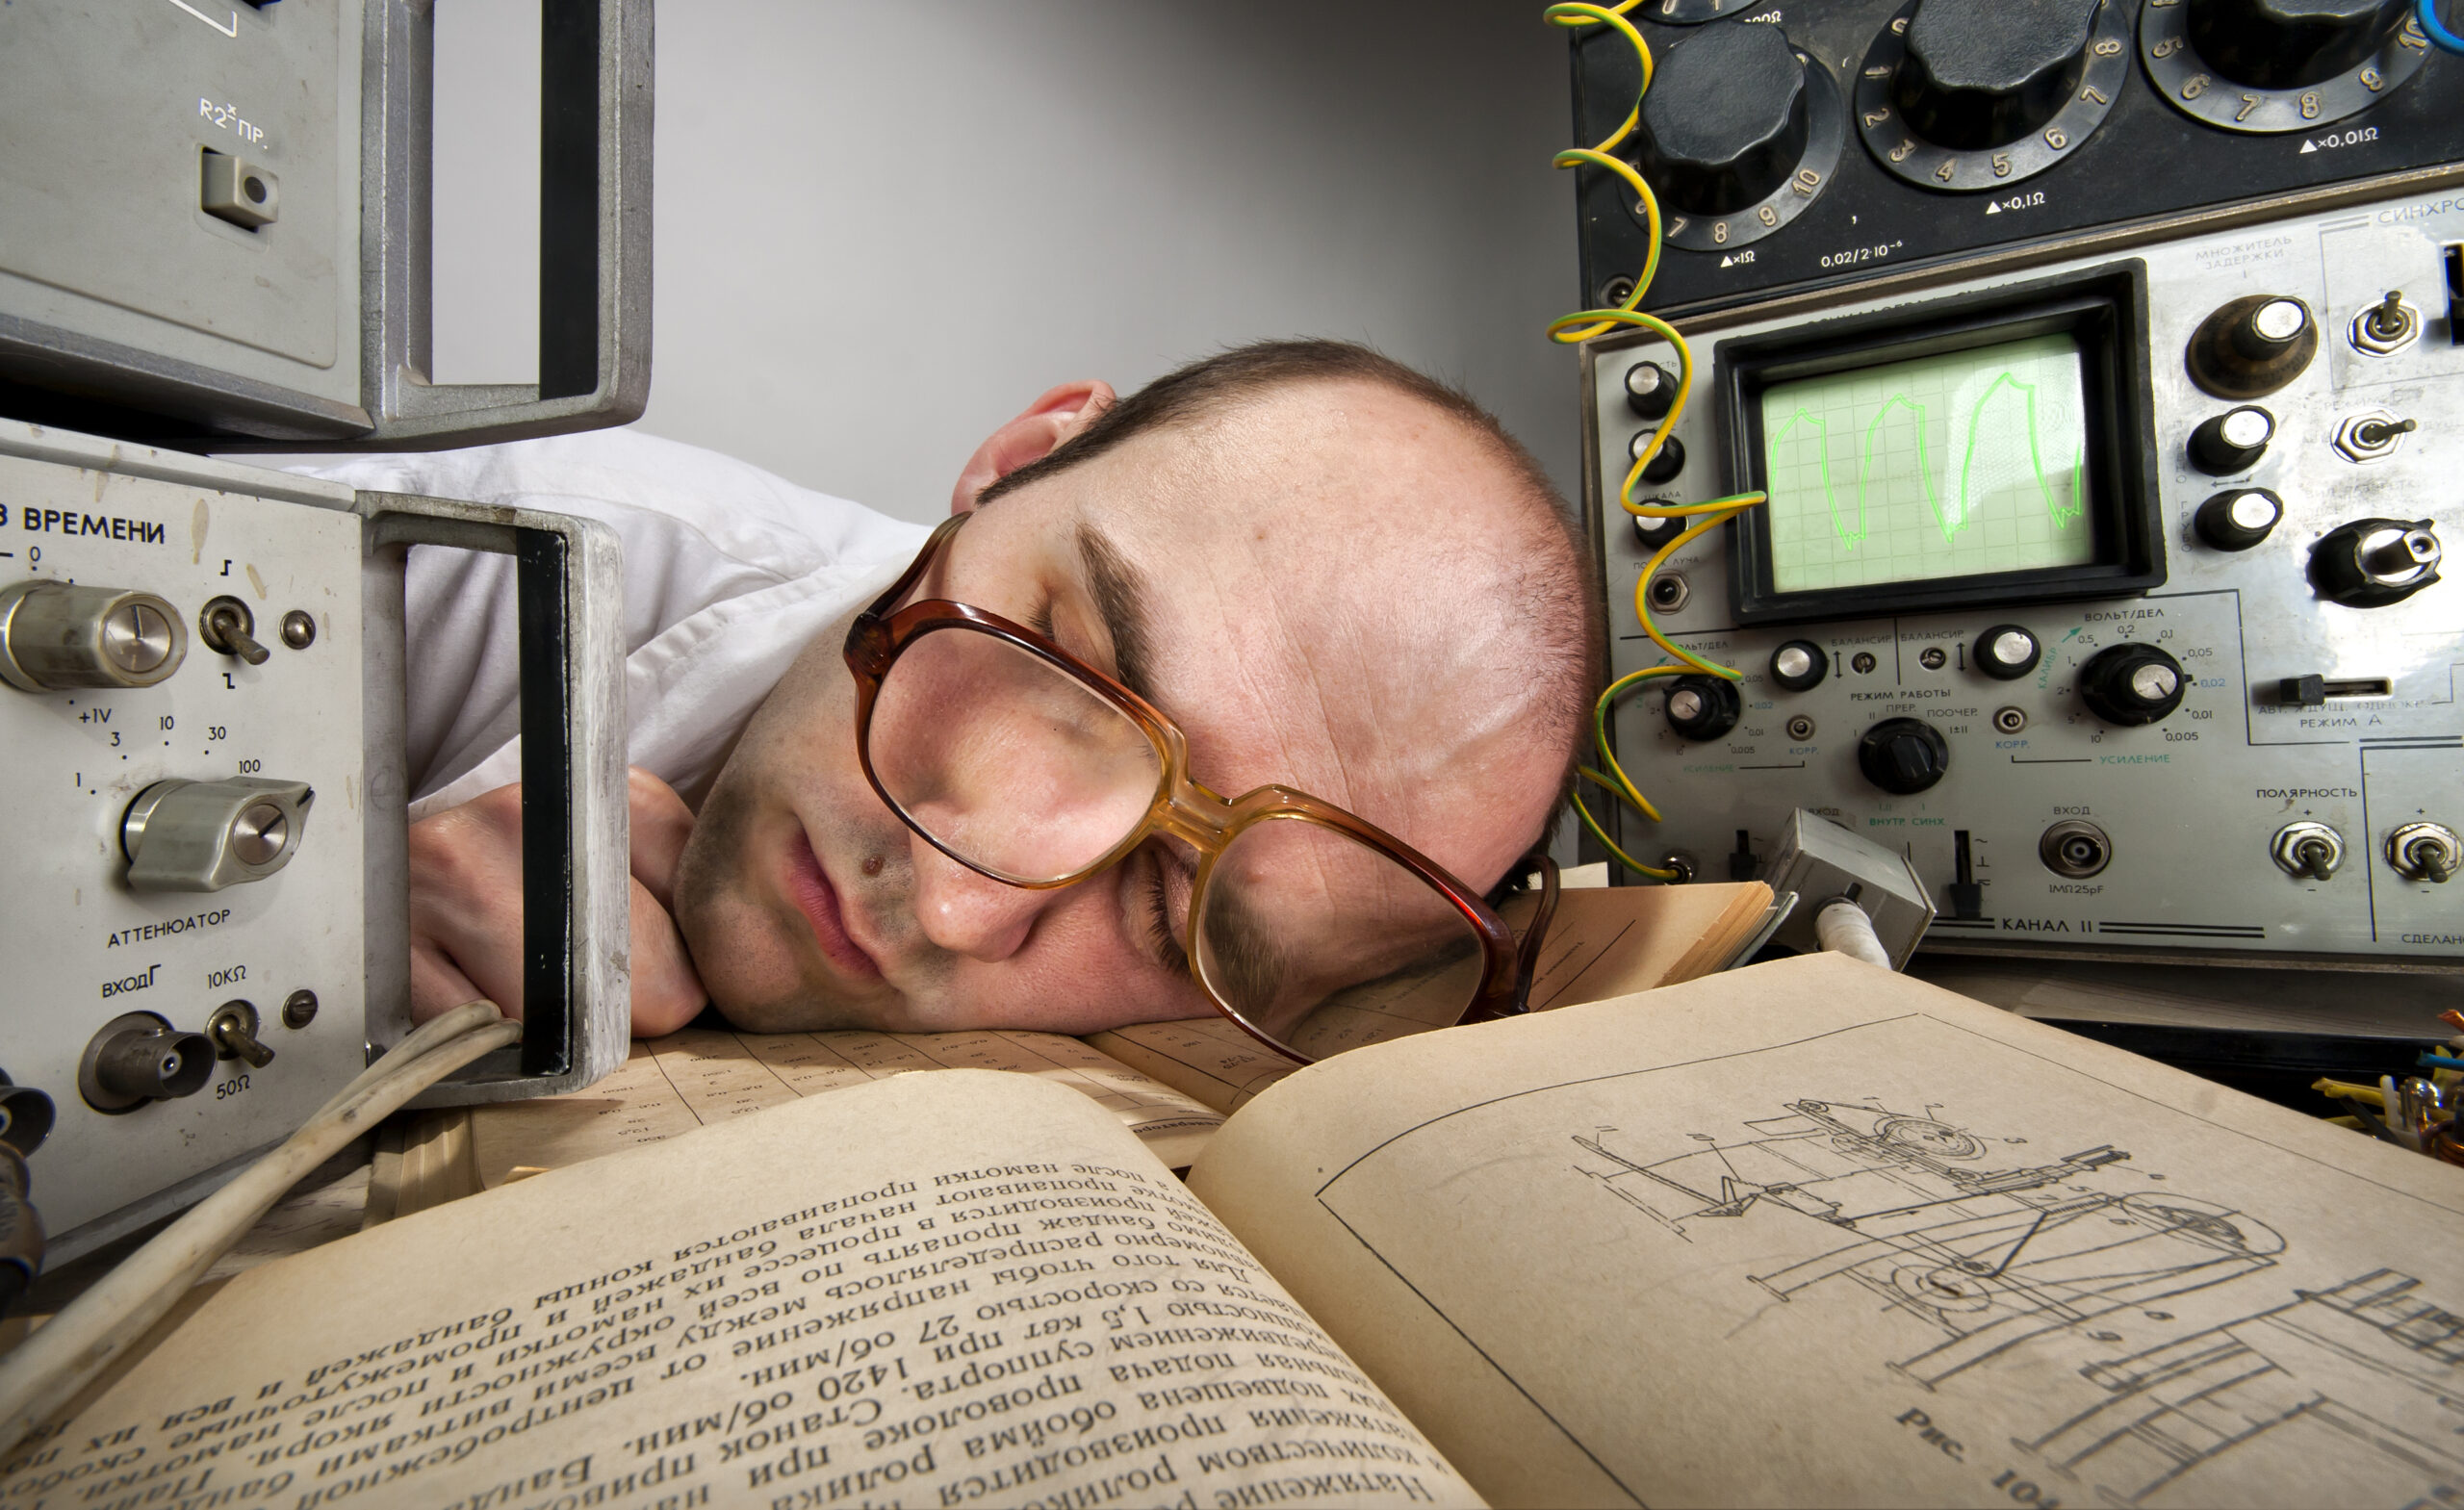 Exhausted scientist sleeping on book